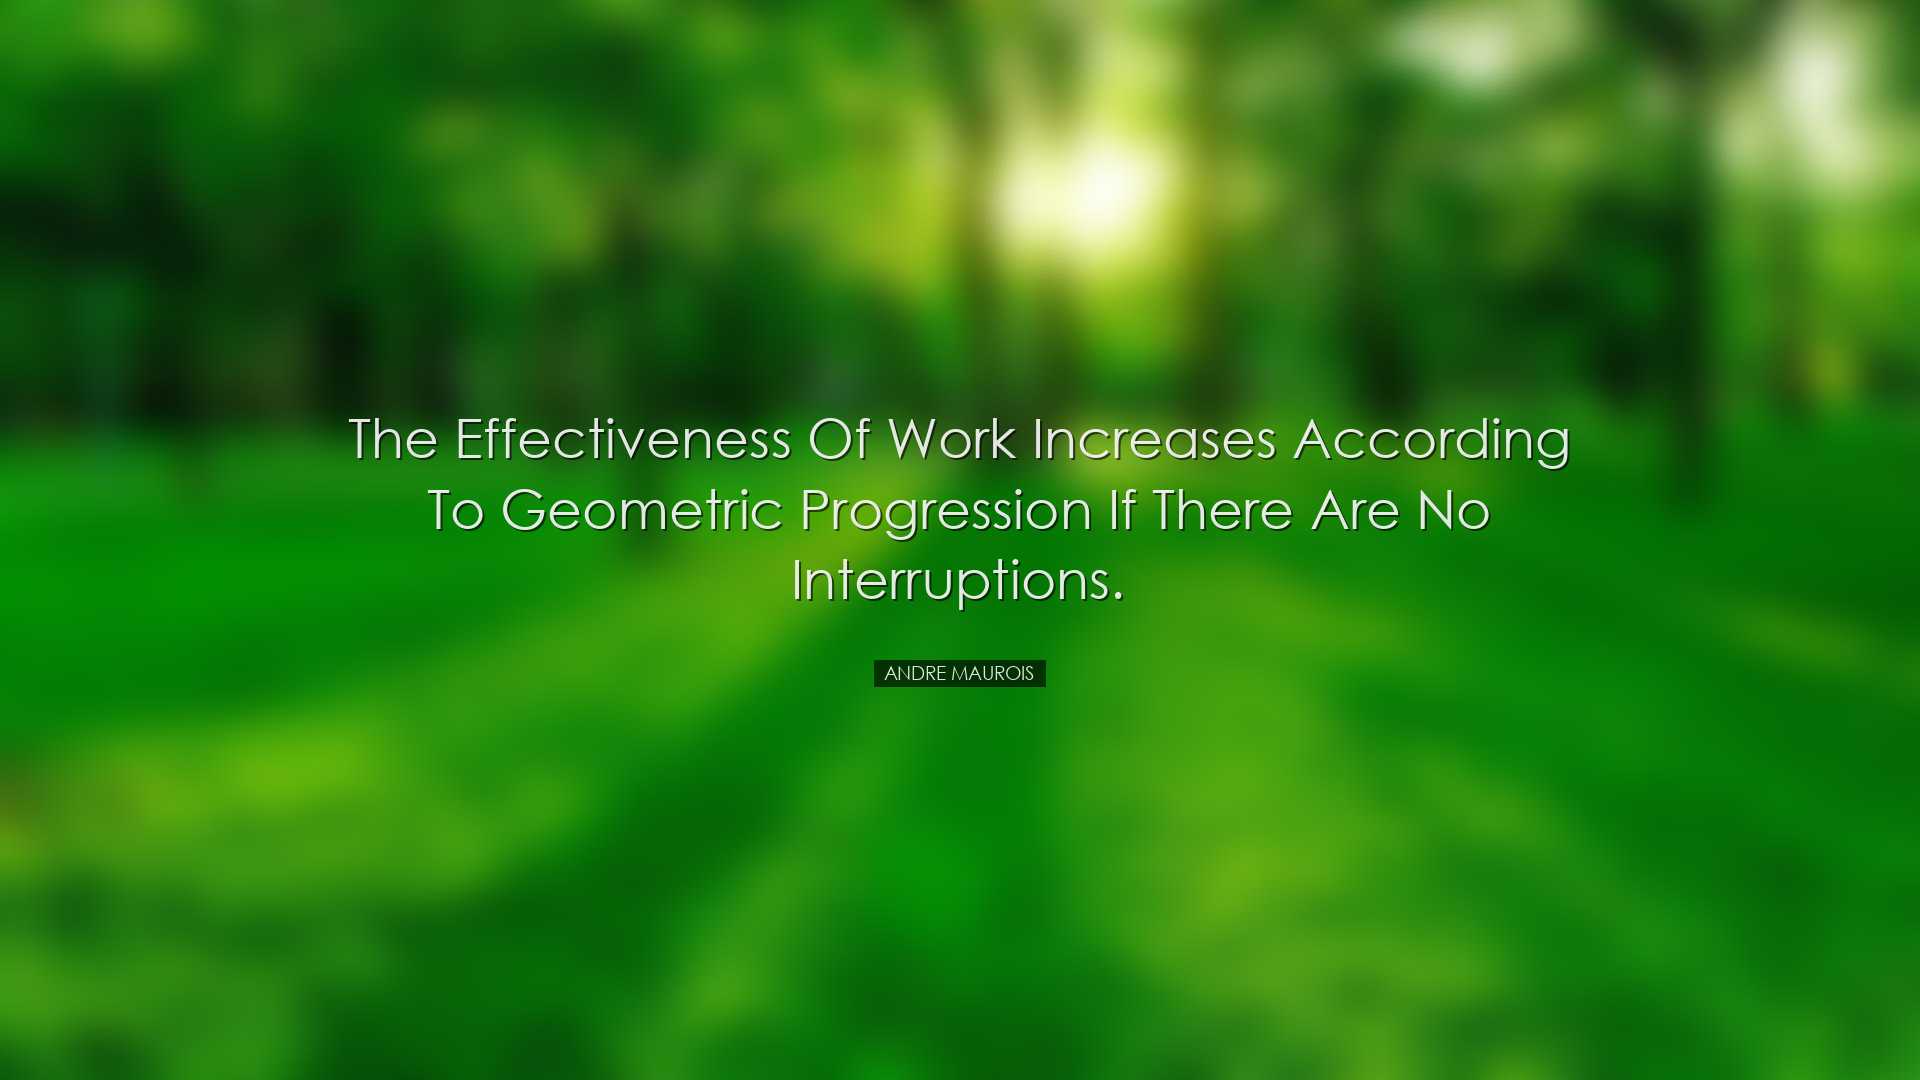 The effectiveness of work increases according to geometric progres